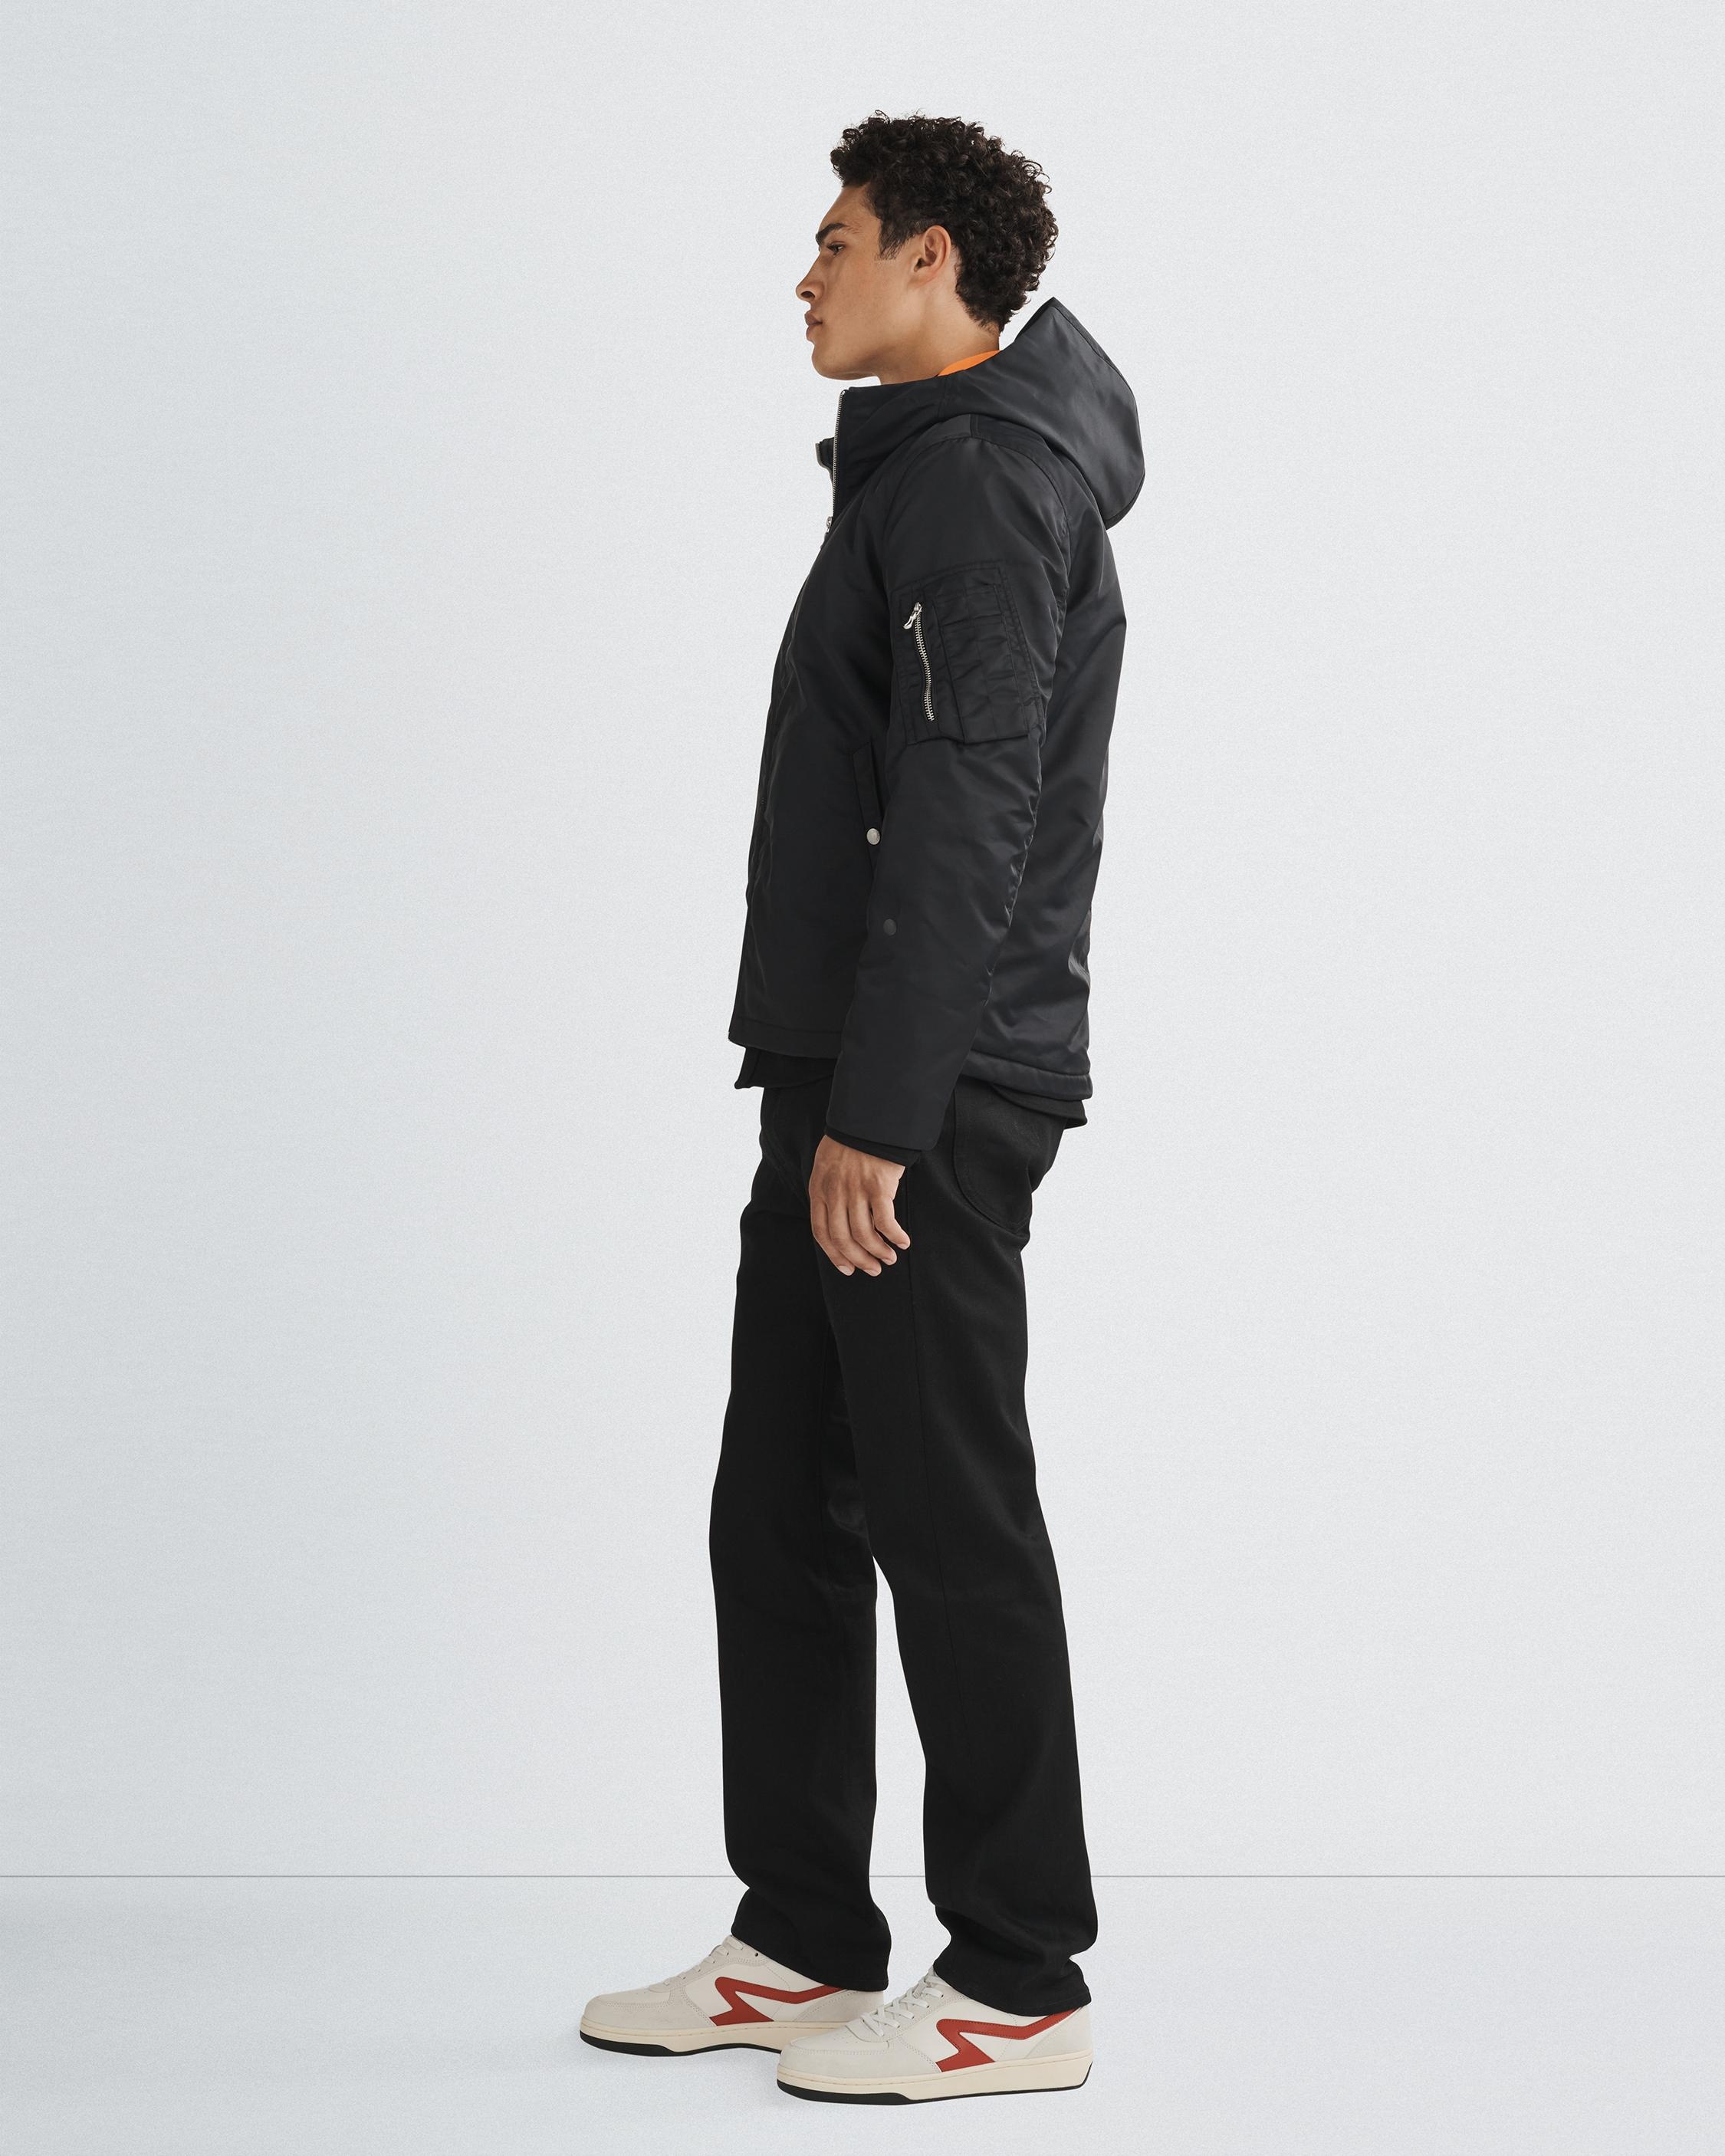 Manston Recycled Nylon Tactic Jacket
Relaxed Fit Jacket - 4